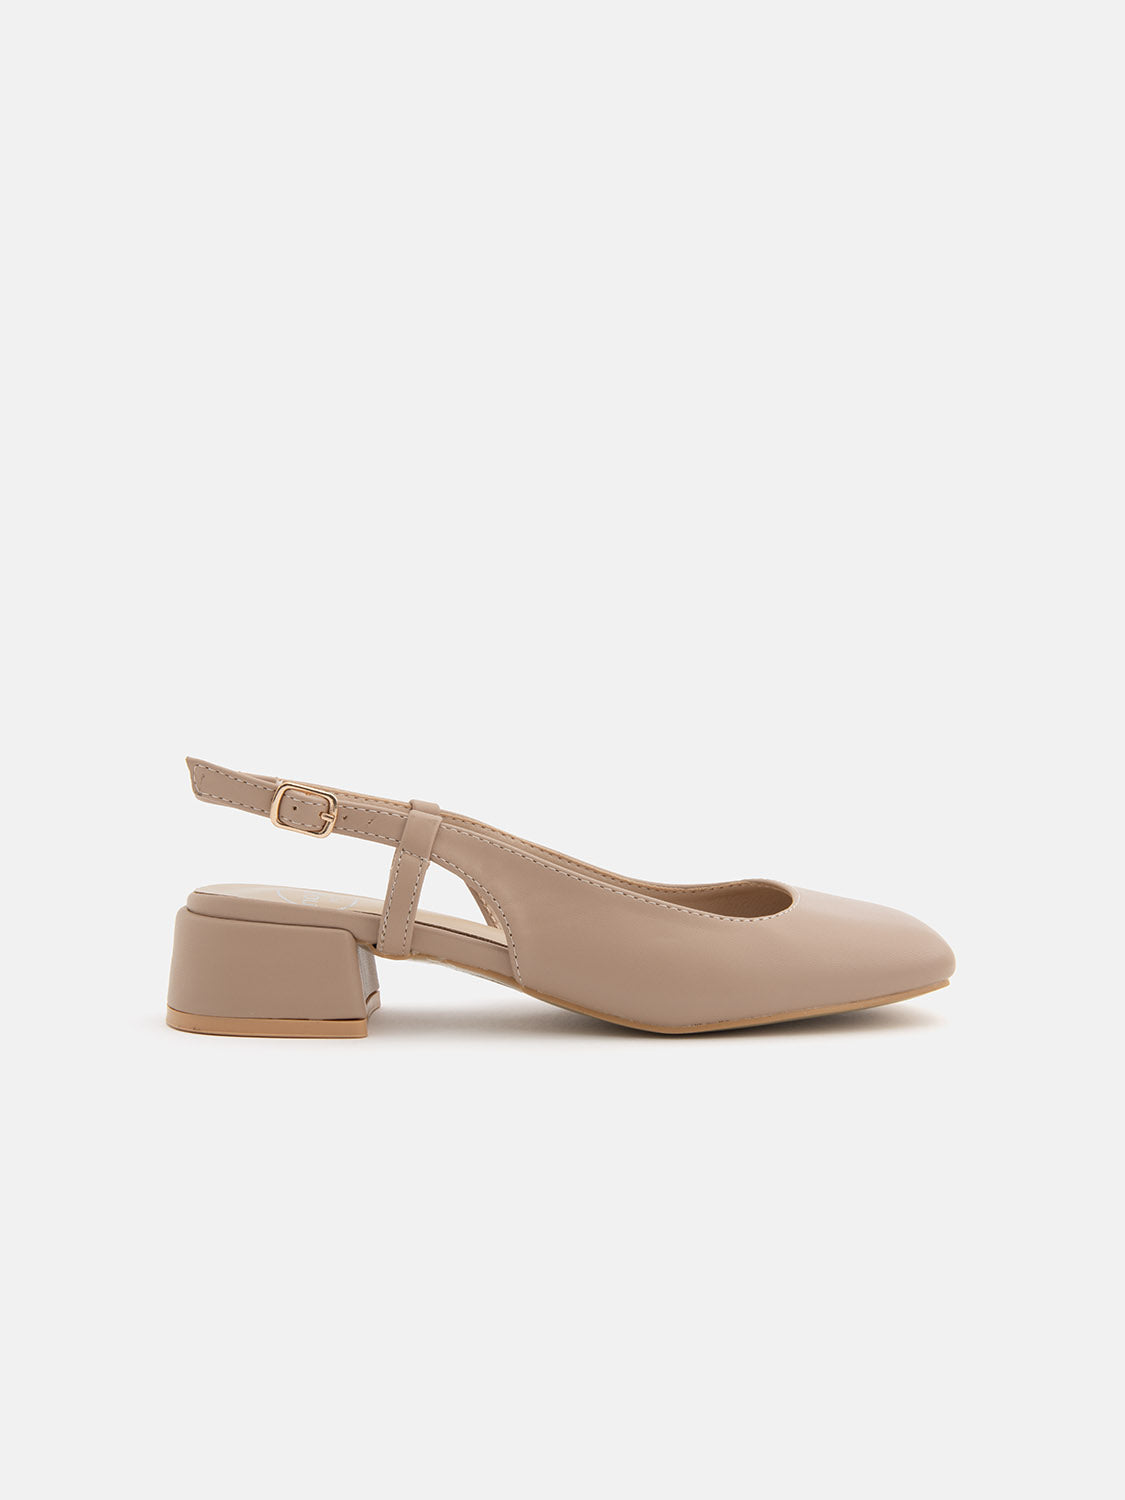 Slinbgback pump with rounded toe - NUDE